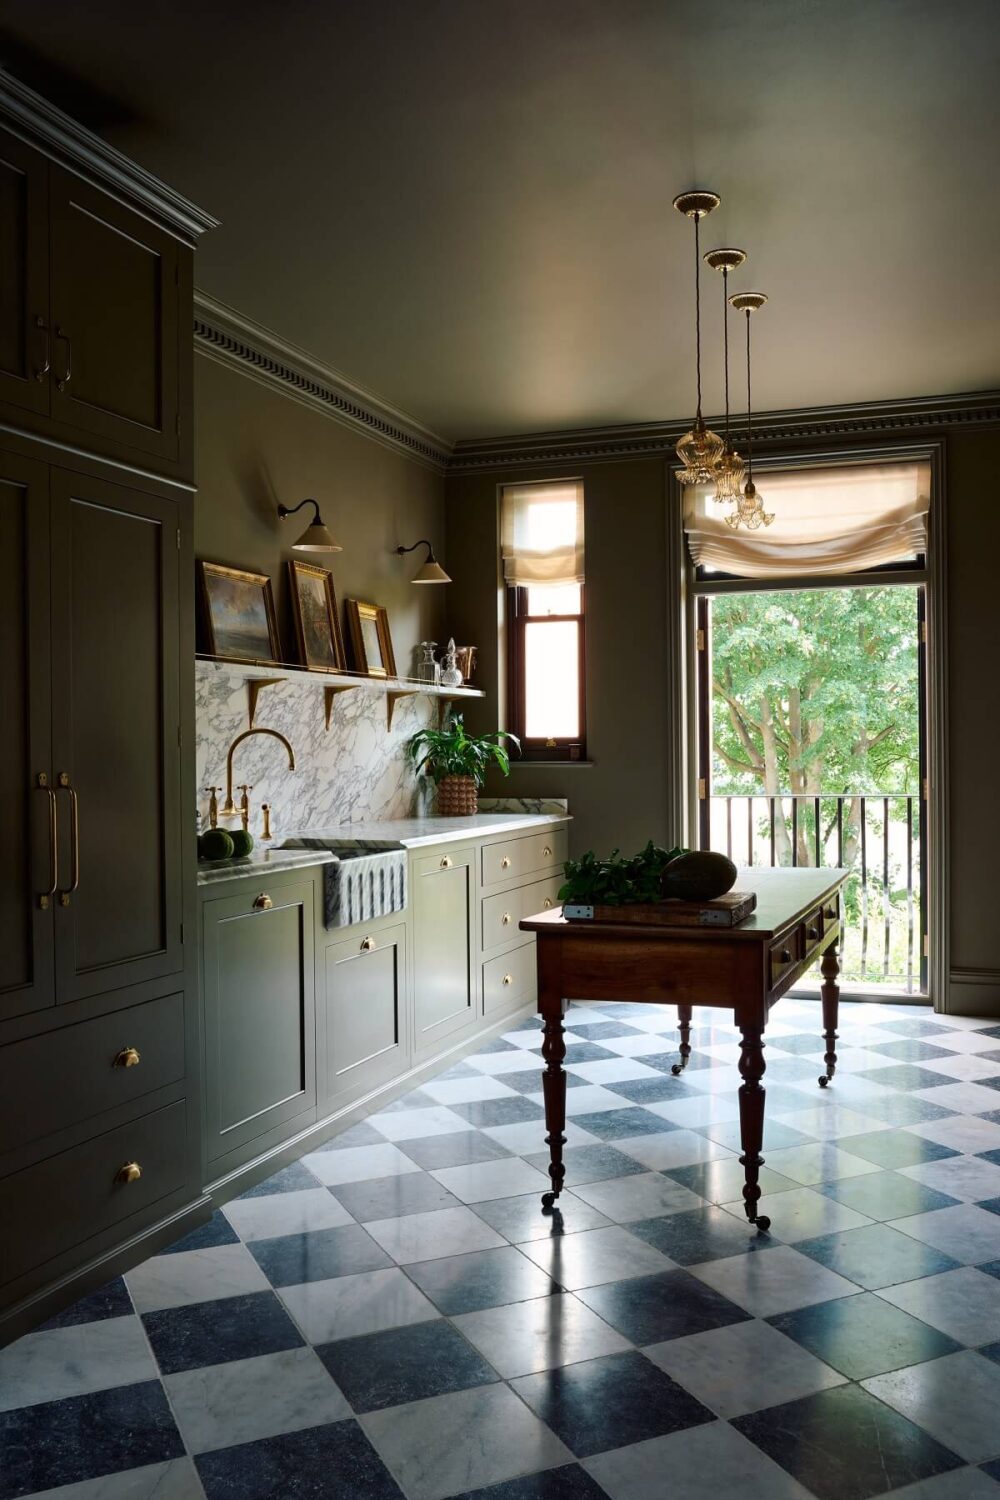 marble-checkerboard-floor-green-kitchen-historic-apartment-nordroom